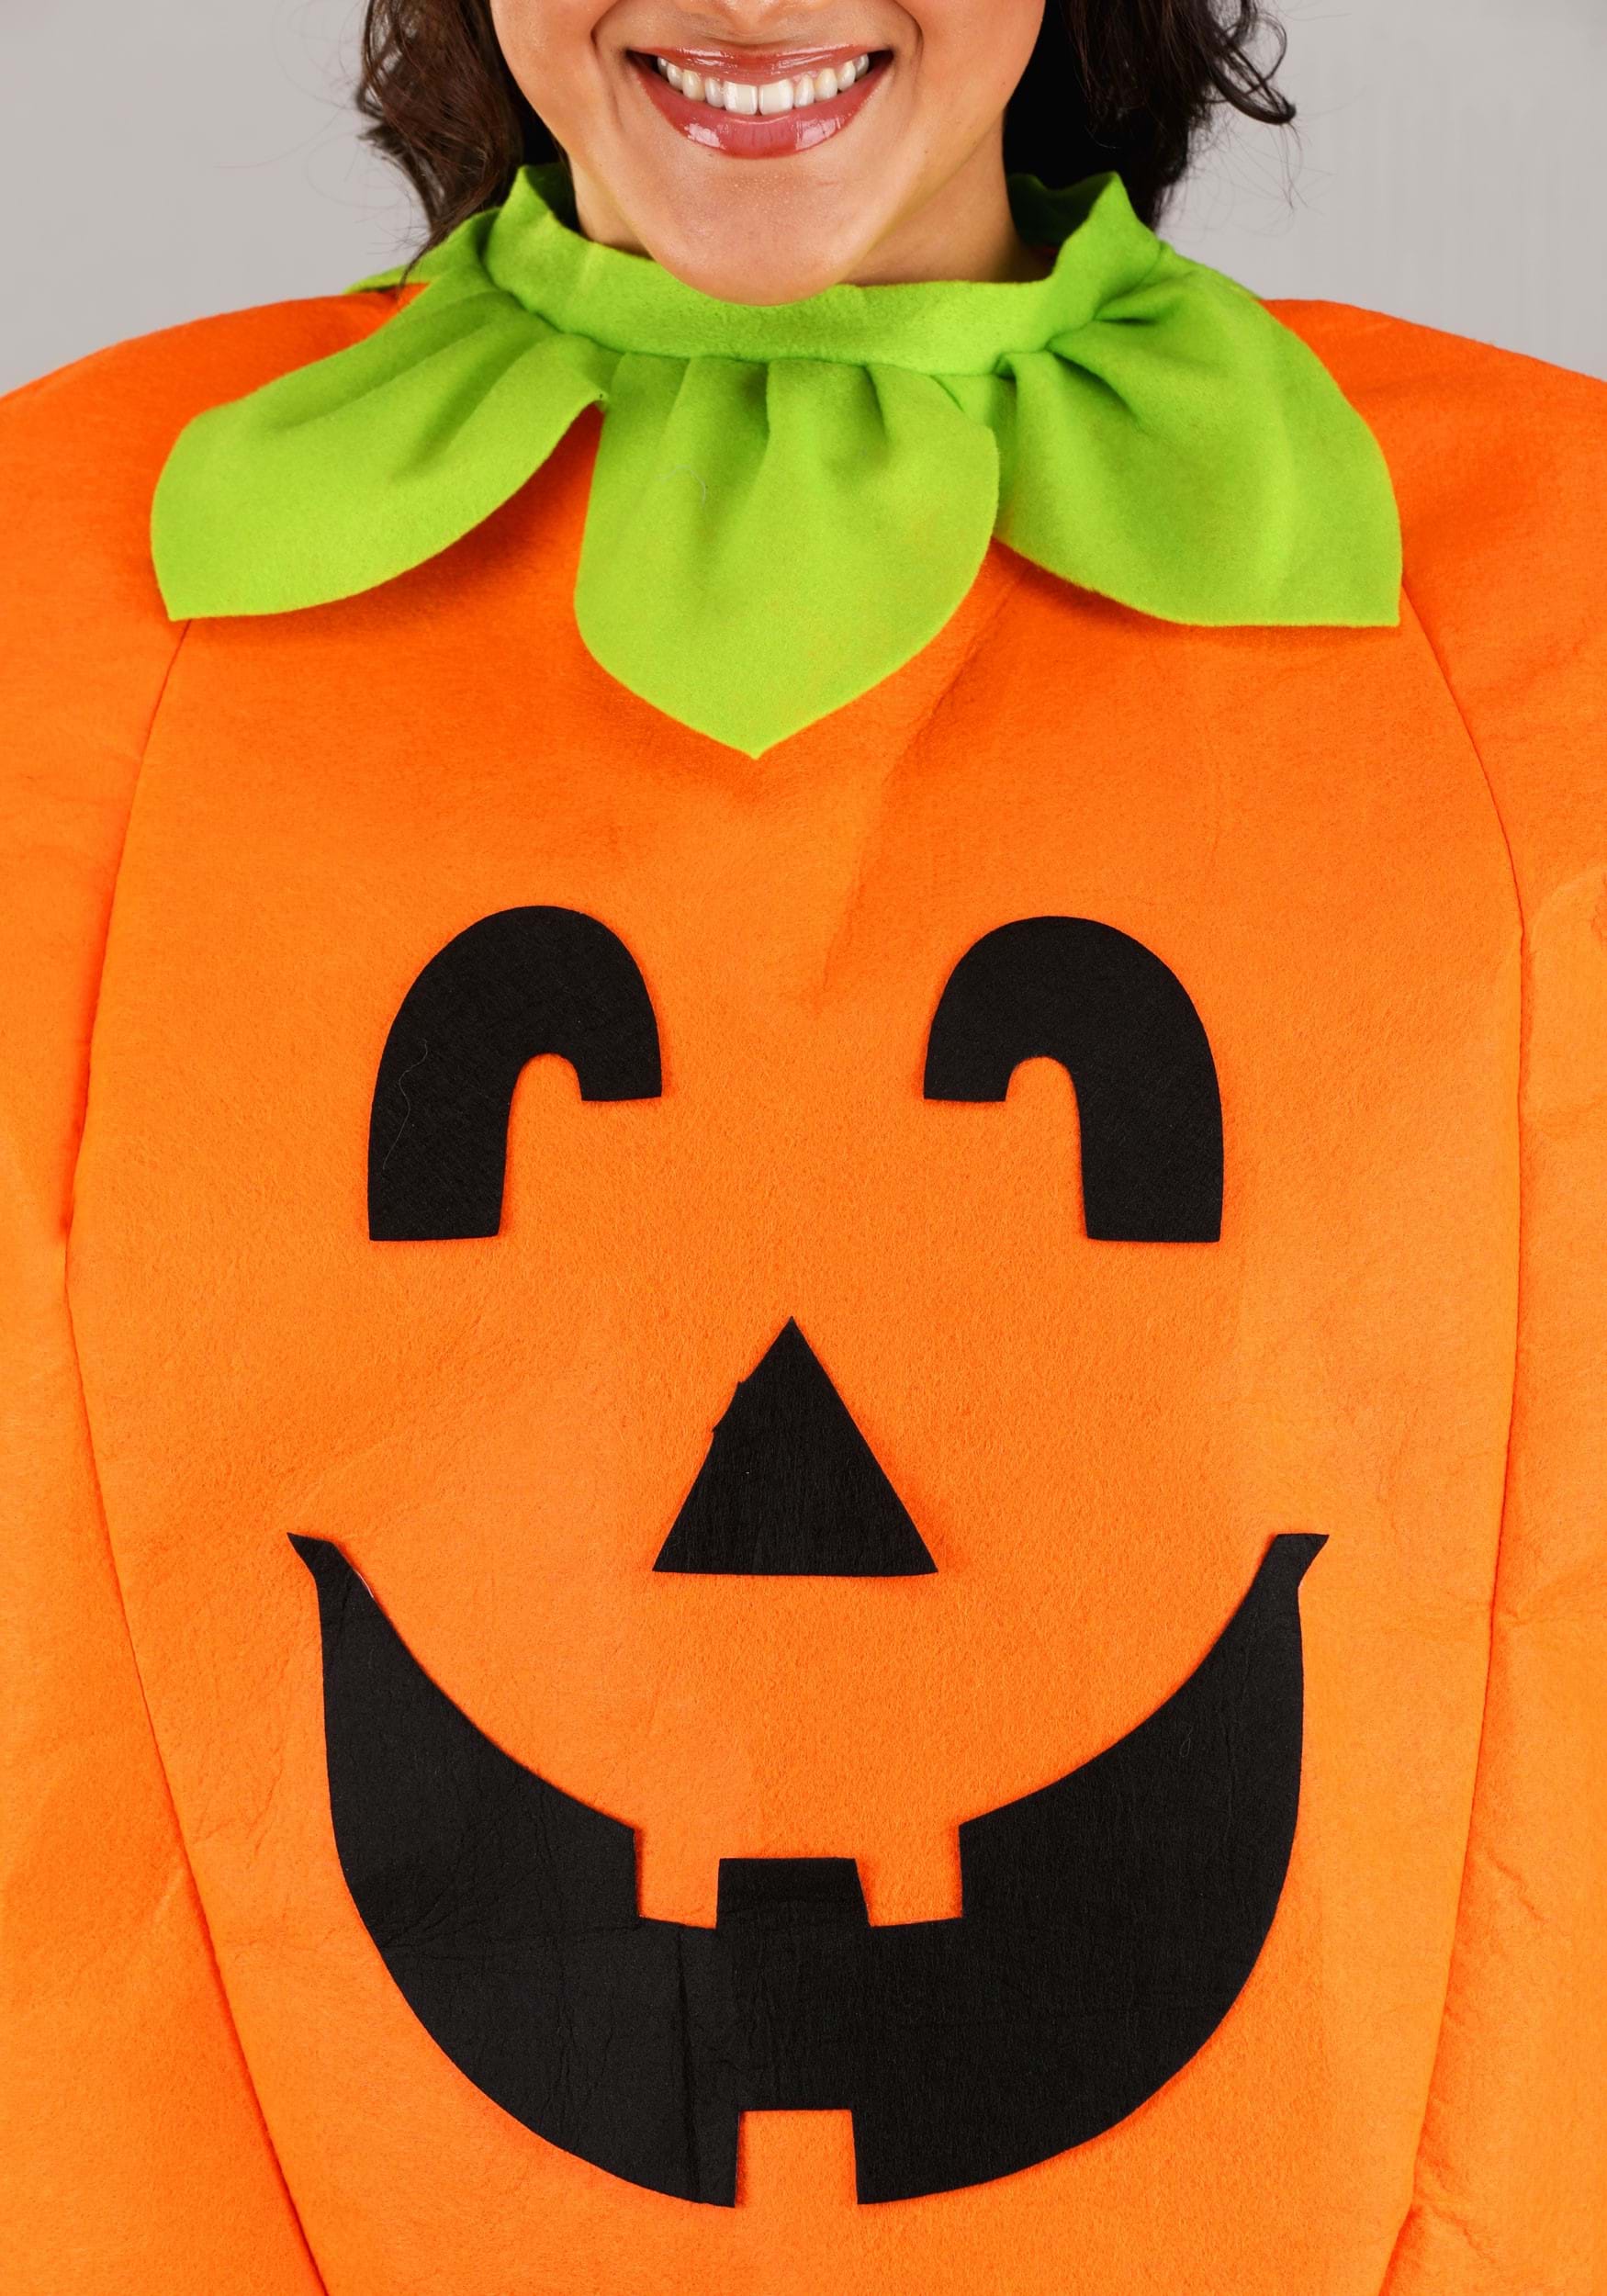 Plus Size Pumpkin Costume For Adults 1X